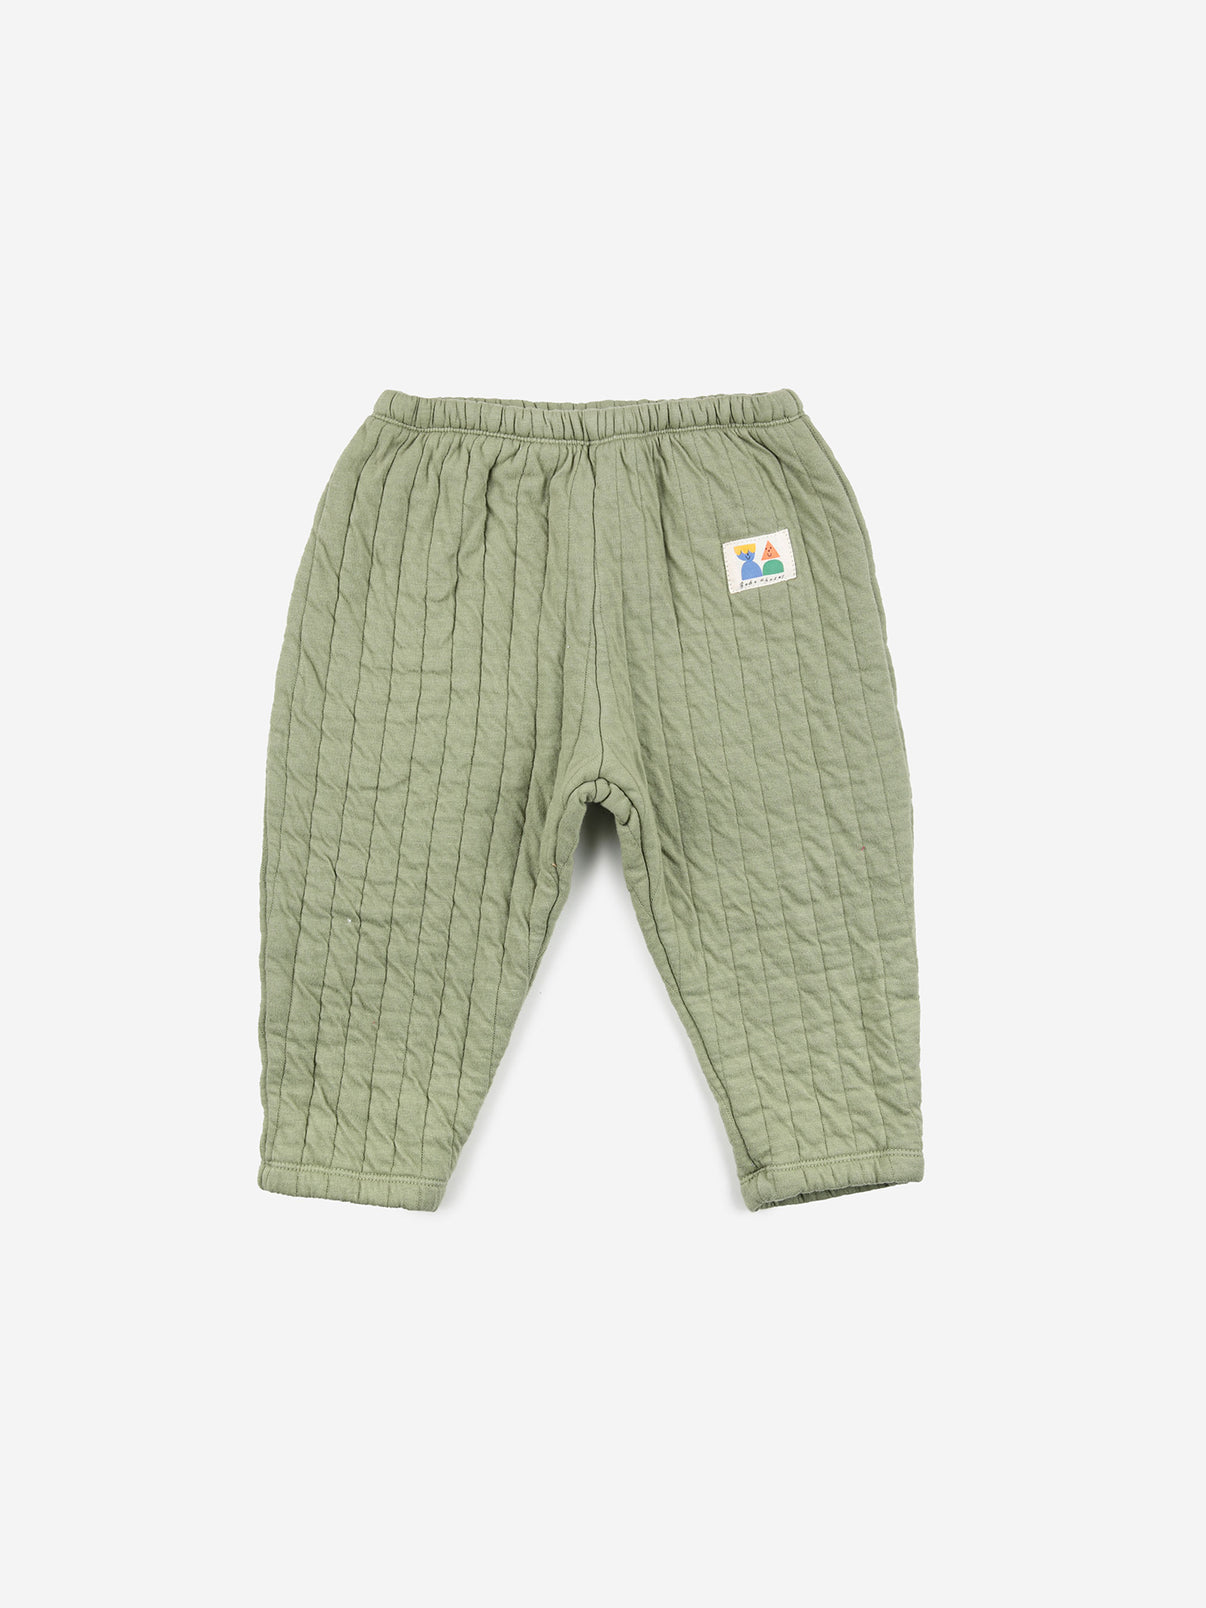 Bobo Choses Baby Quilted Jogging Pants - 78% cotton 22% polyester light green trousers. Designed with elasticated waistband, patch and lightly padded. It has a baggy fit. Made in Portugal.